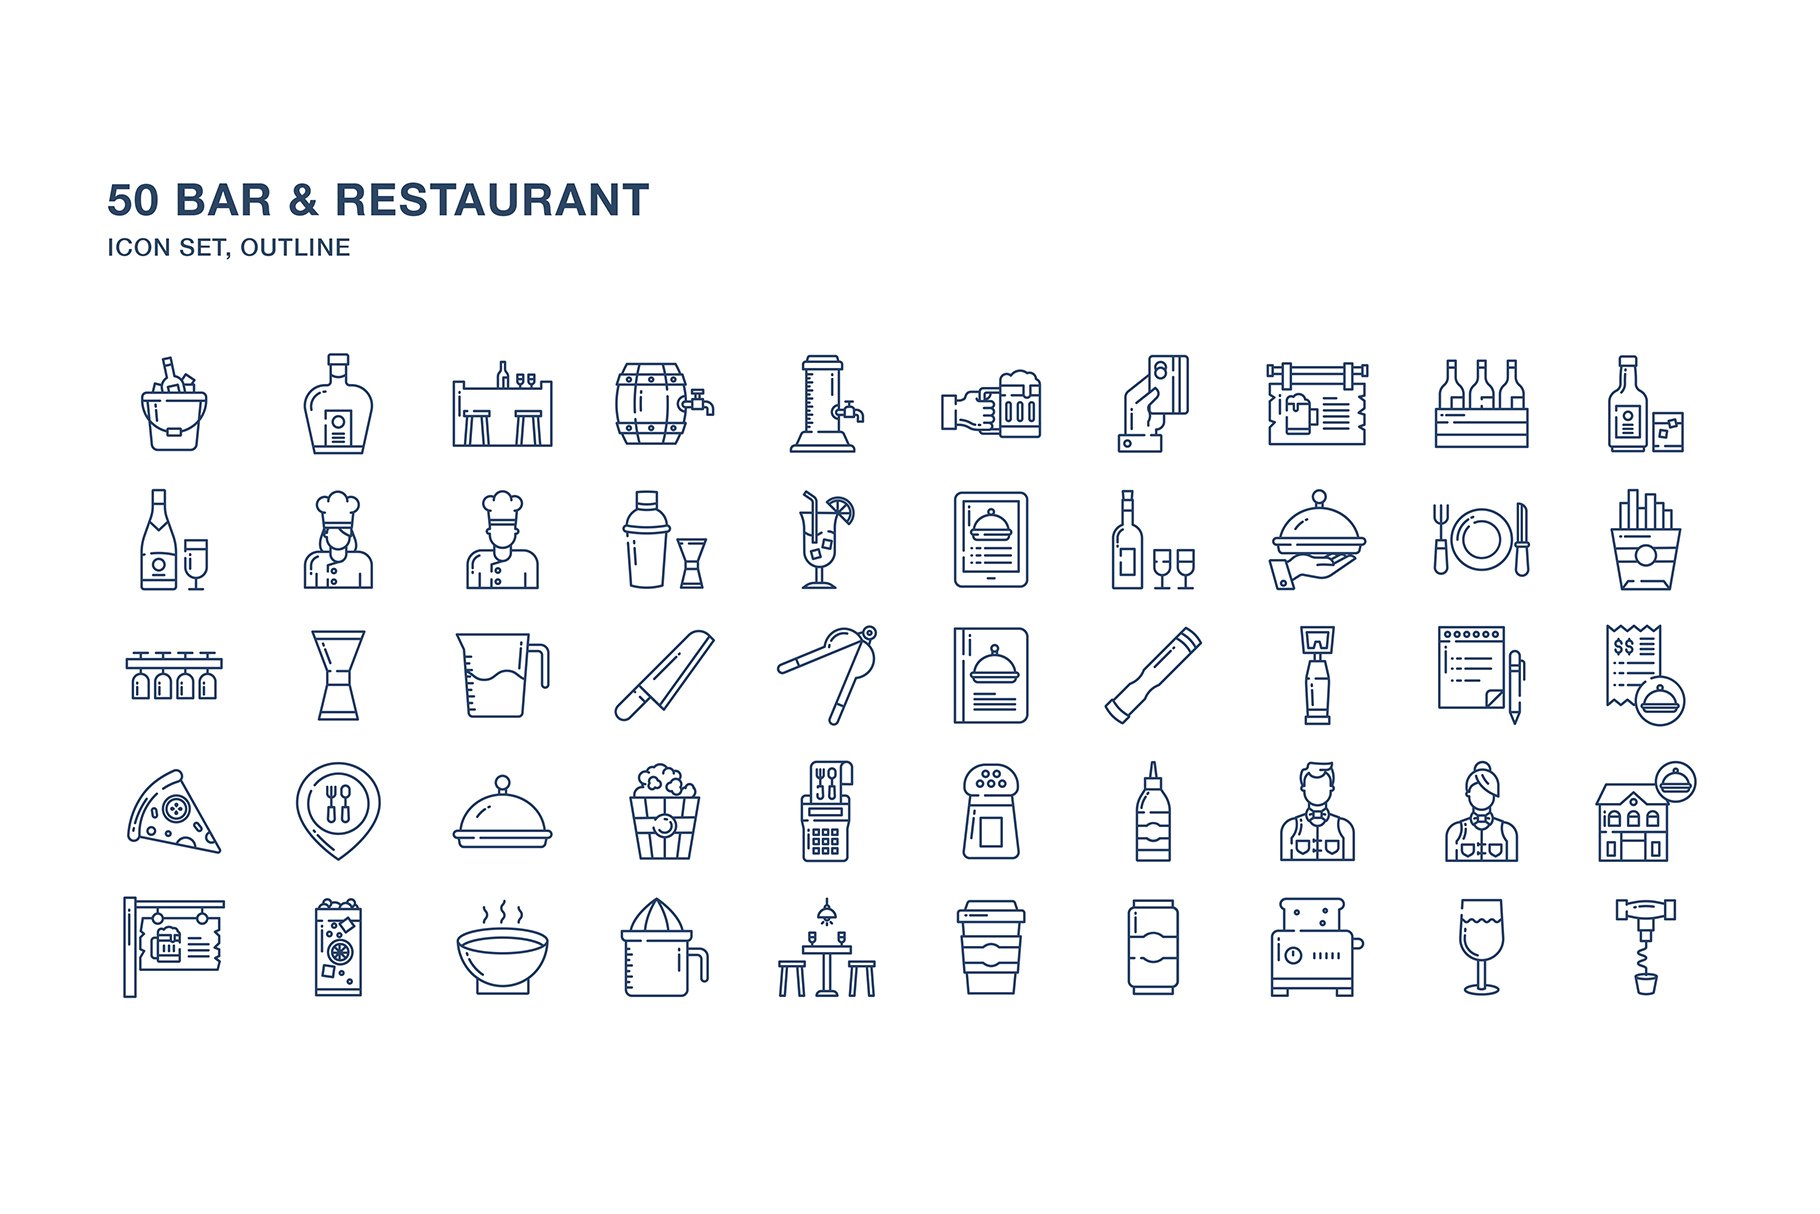 Bar and restaurant icon set preview image.